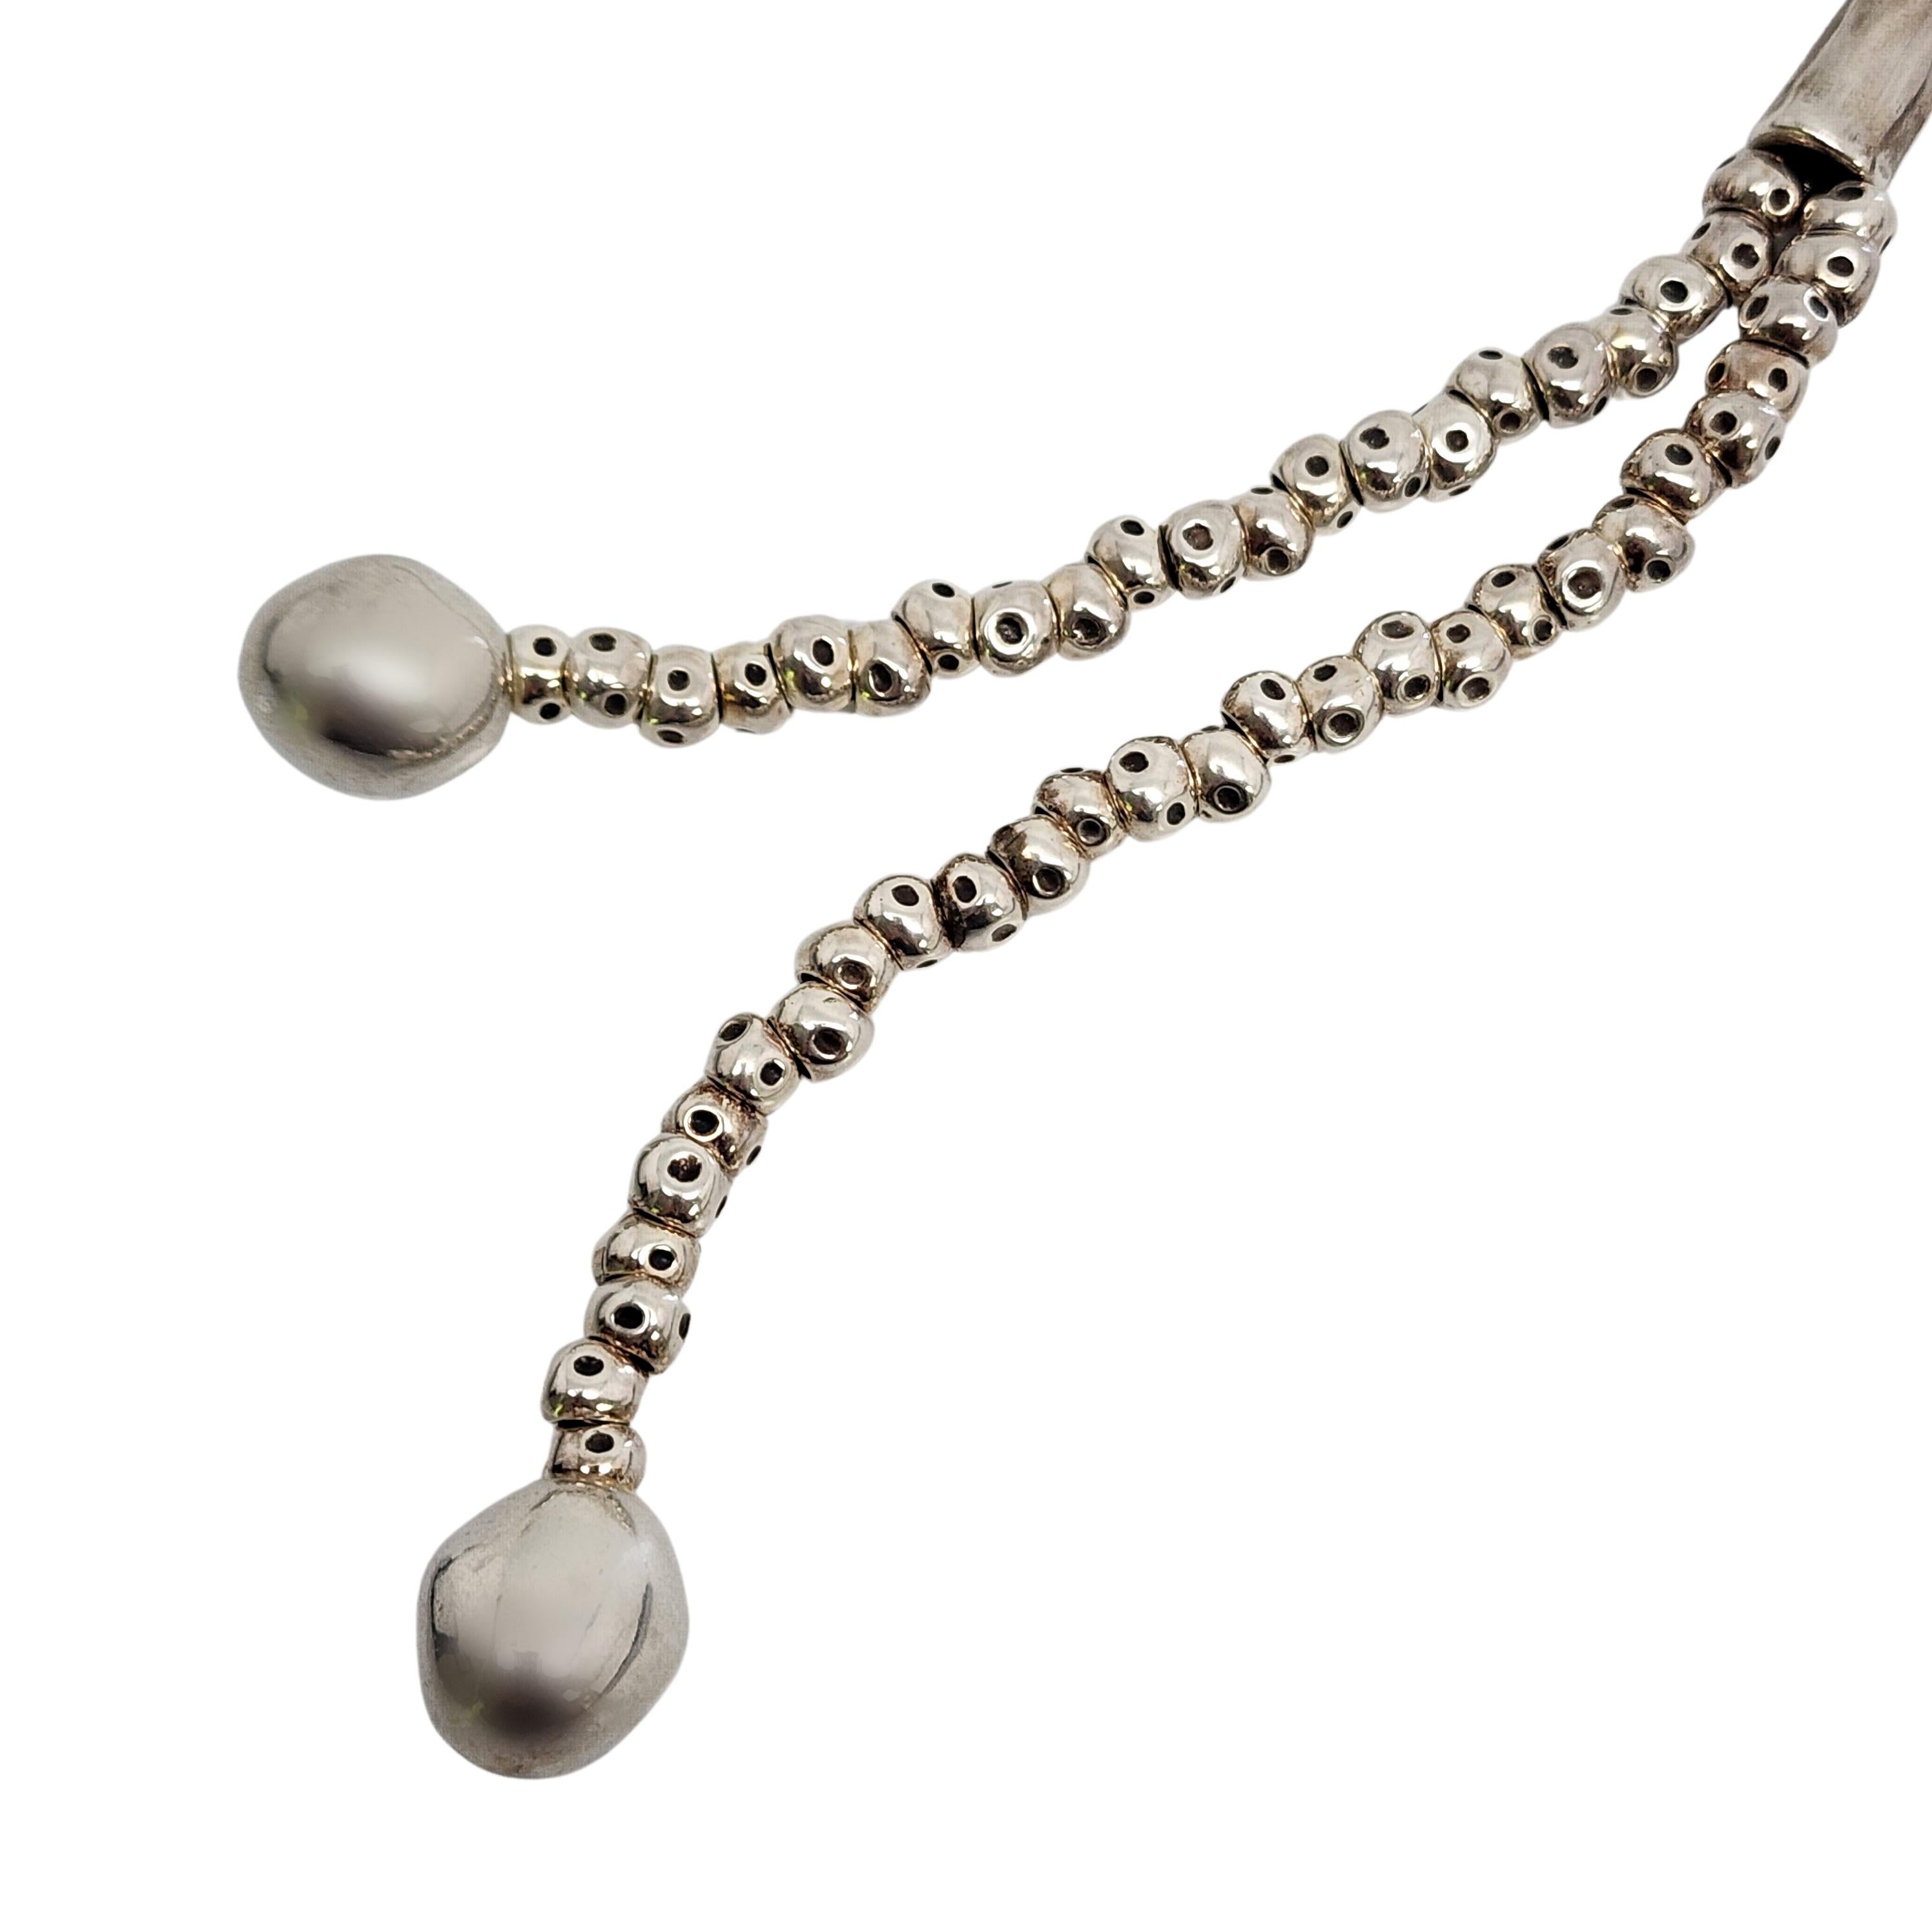 Uno de 50 All Balls Silver Plated Necklace #12790 For Sale 2